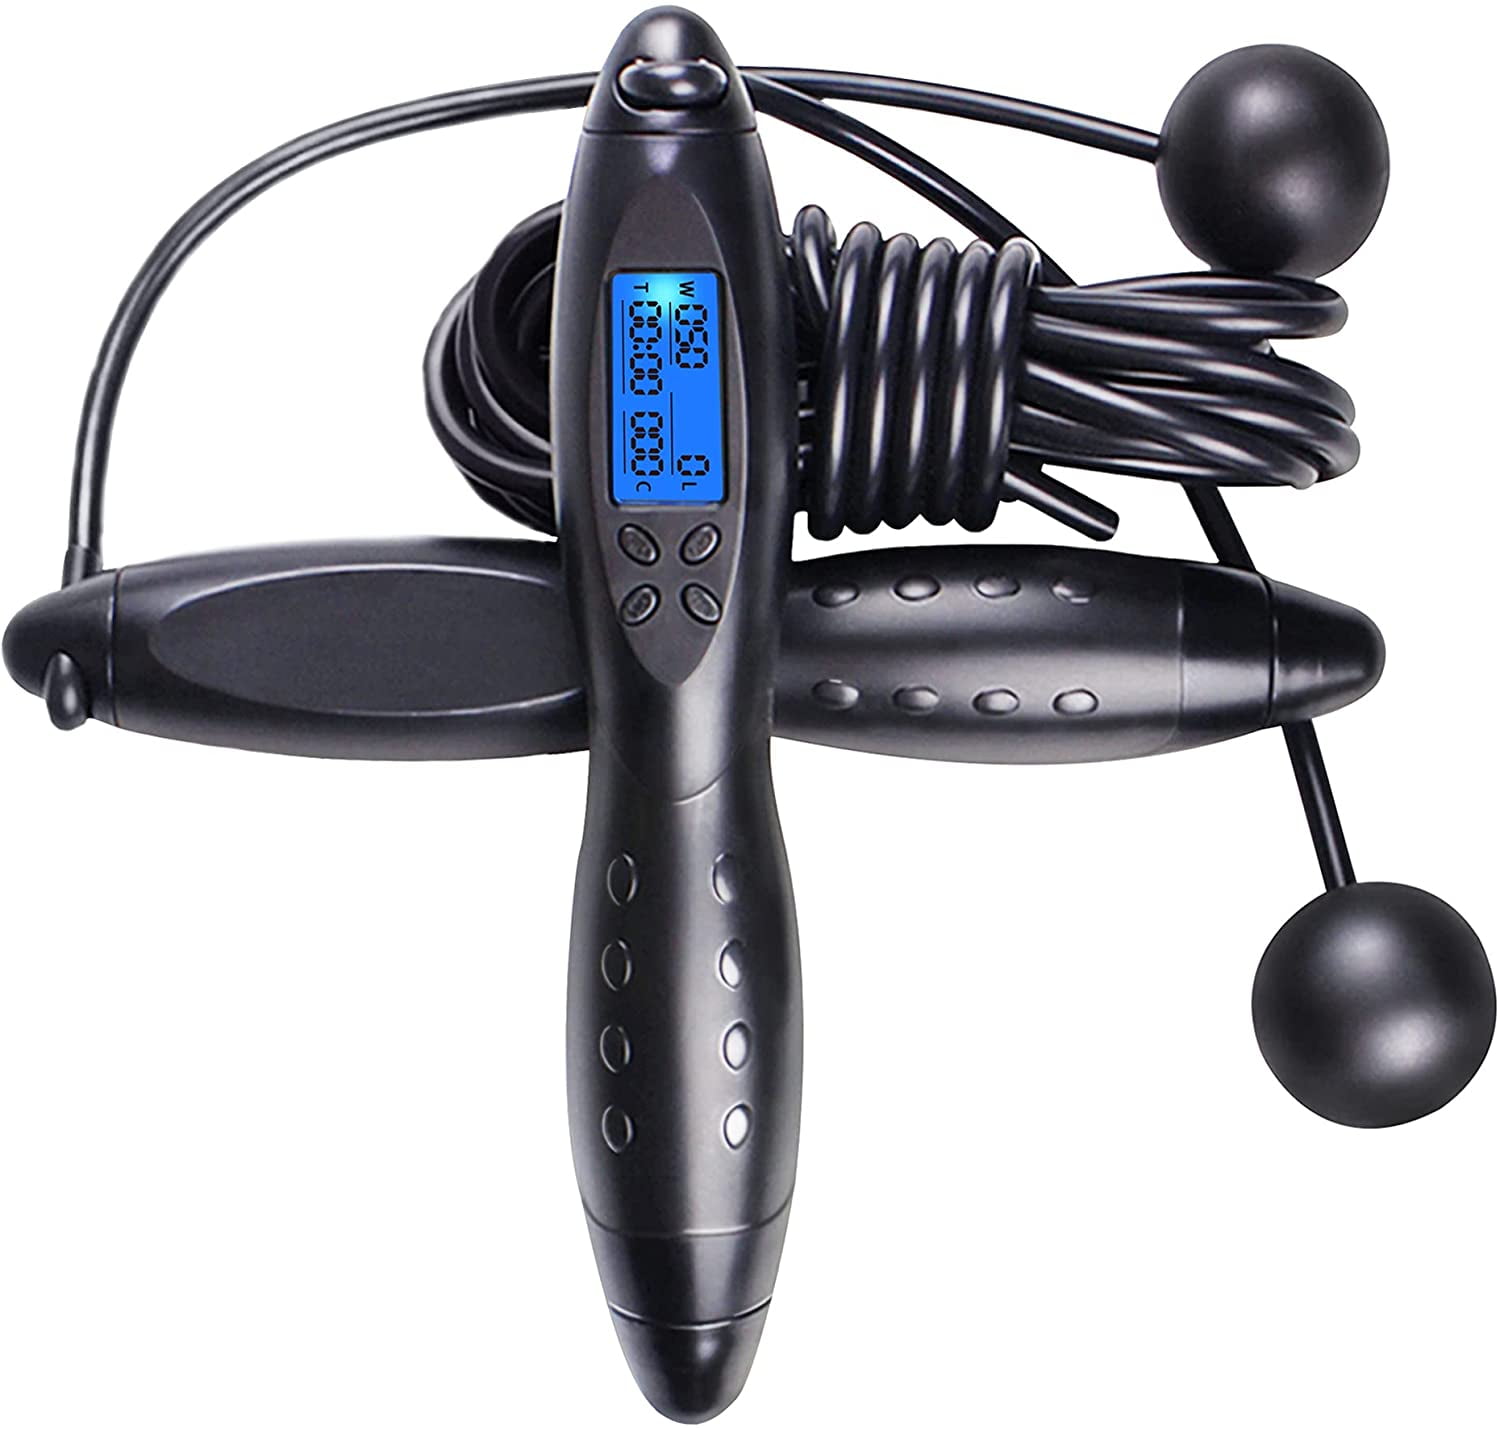 Adjustable Ropeless Jump Rope & Counter Jump Rope Speed Skipping Gym Exercise US 